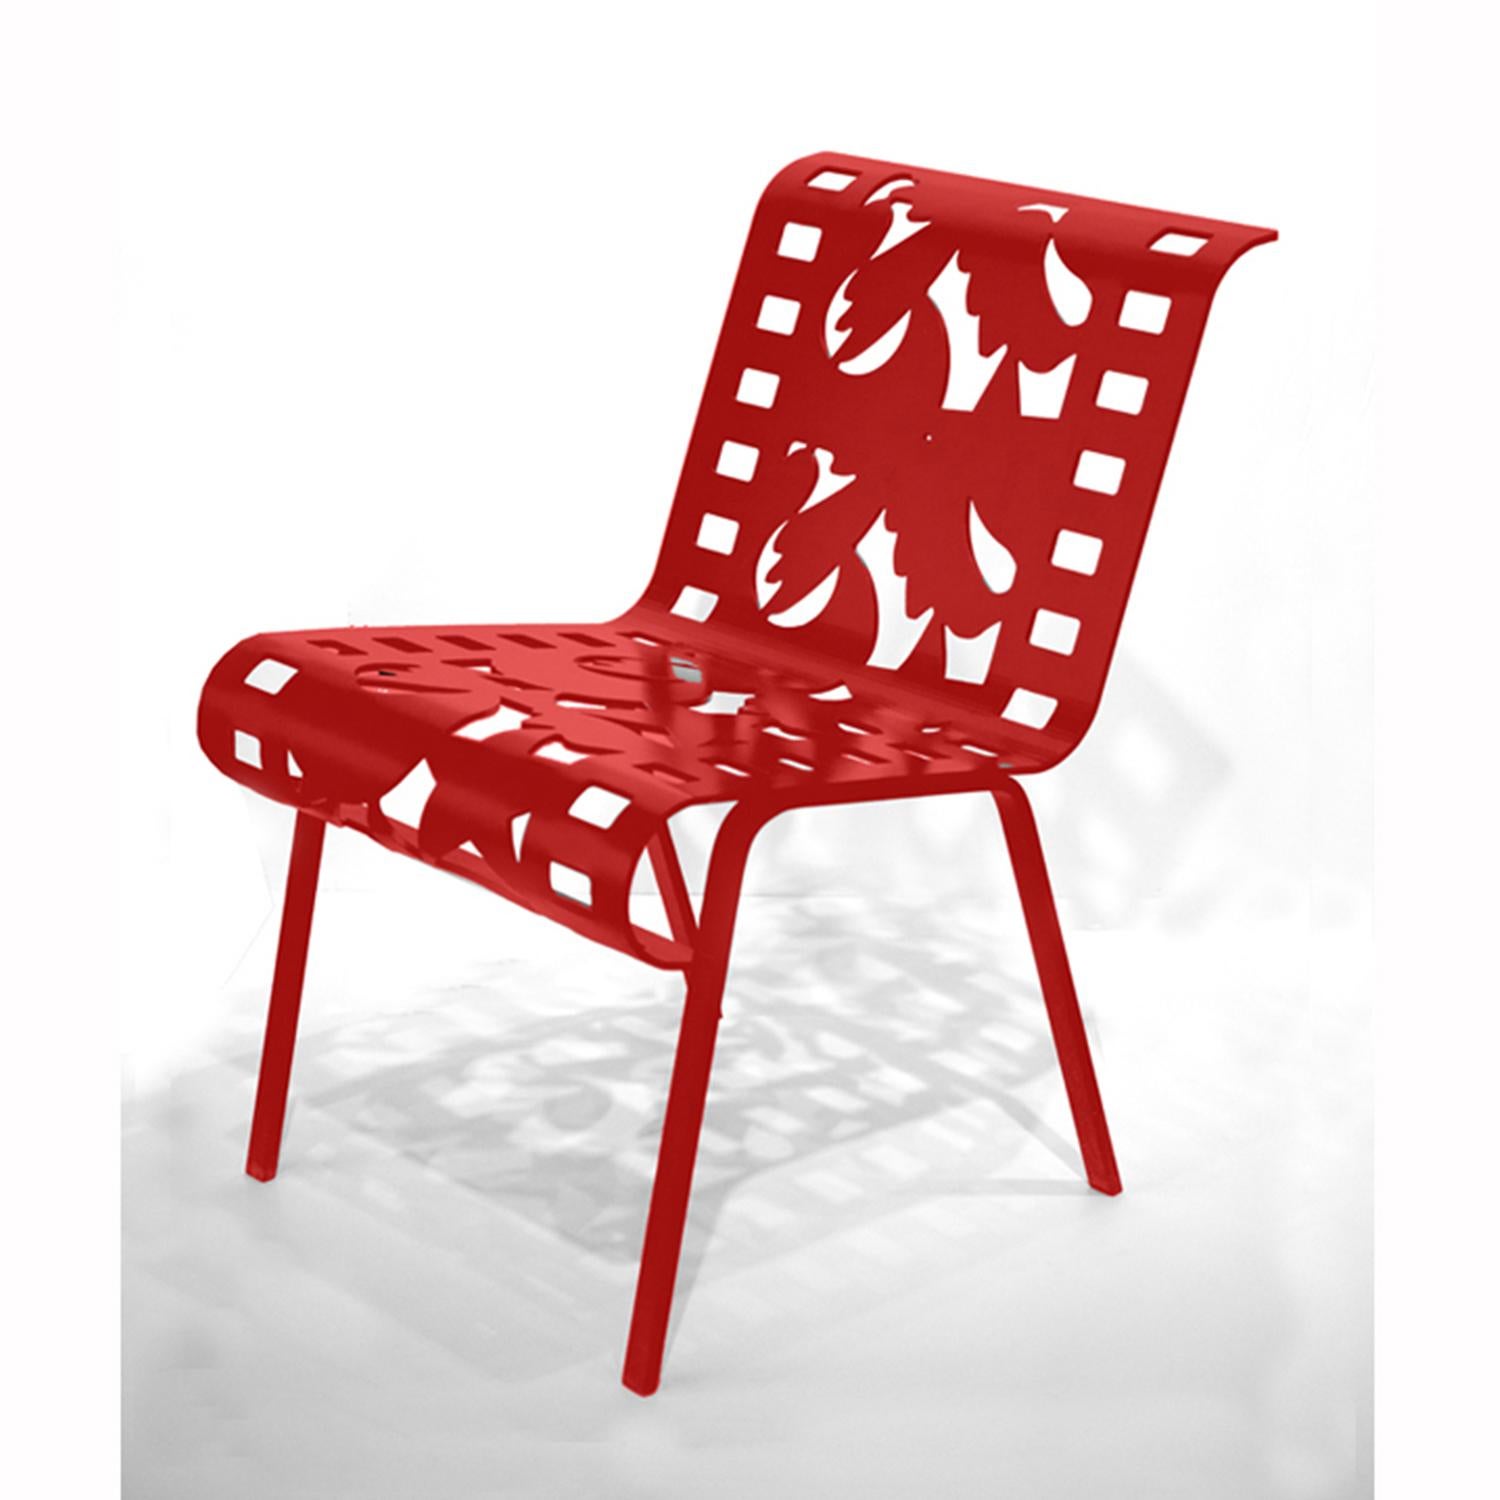 Lucia Eames Figurative Sculpture - Chairs from Cutting Room Floor Series - Red 5/48